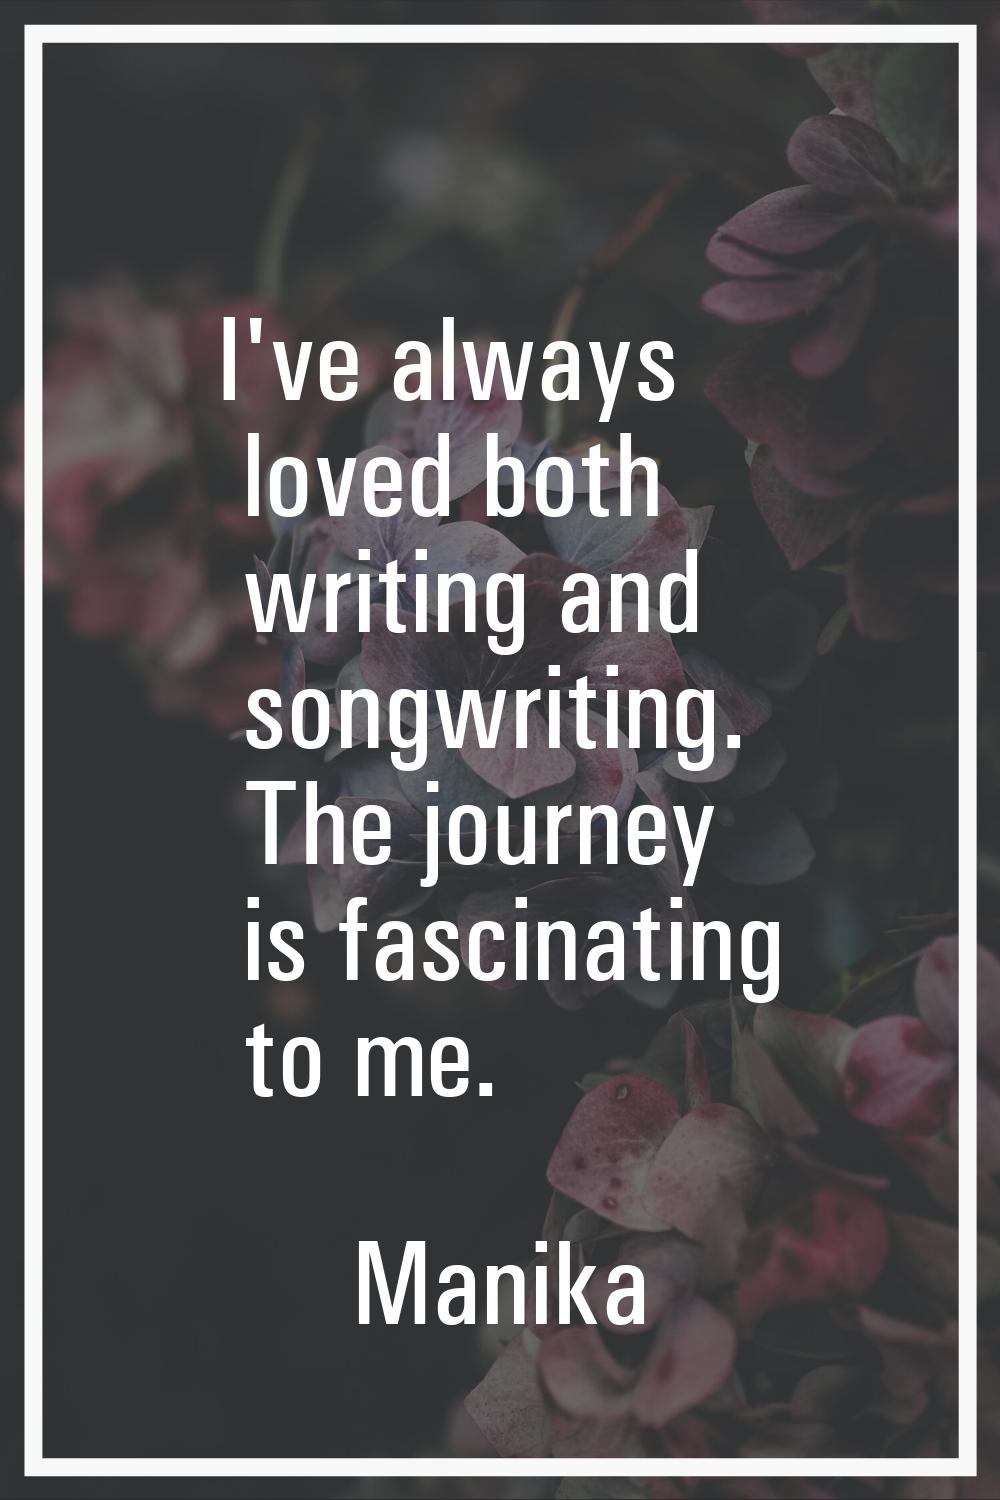 I've always loved both writing and songwriting. The journey is fascinating to me.